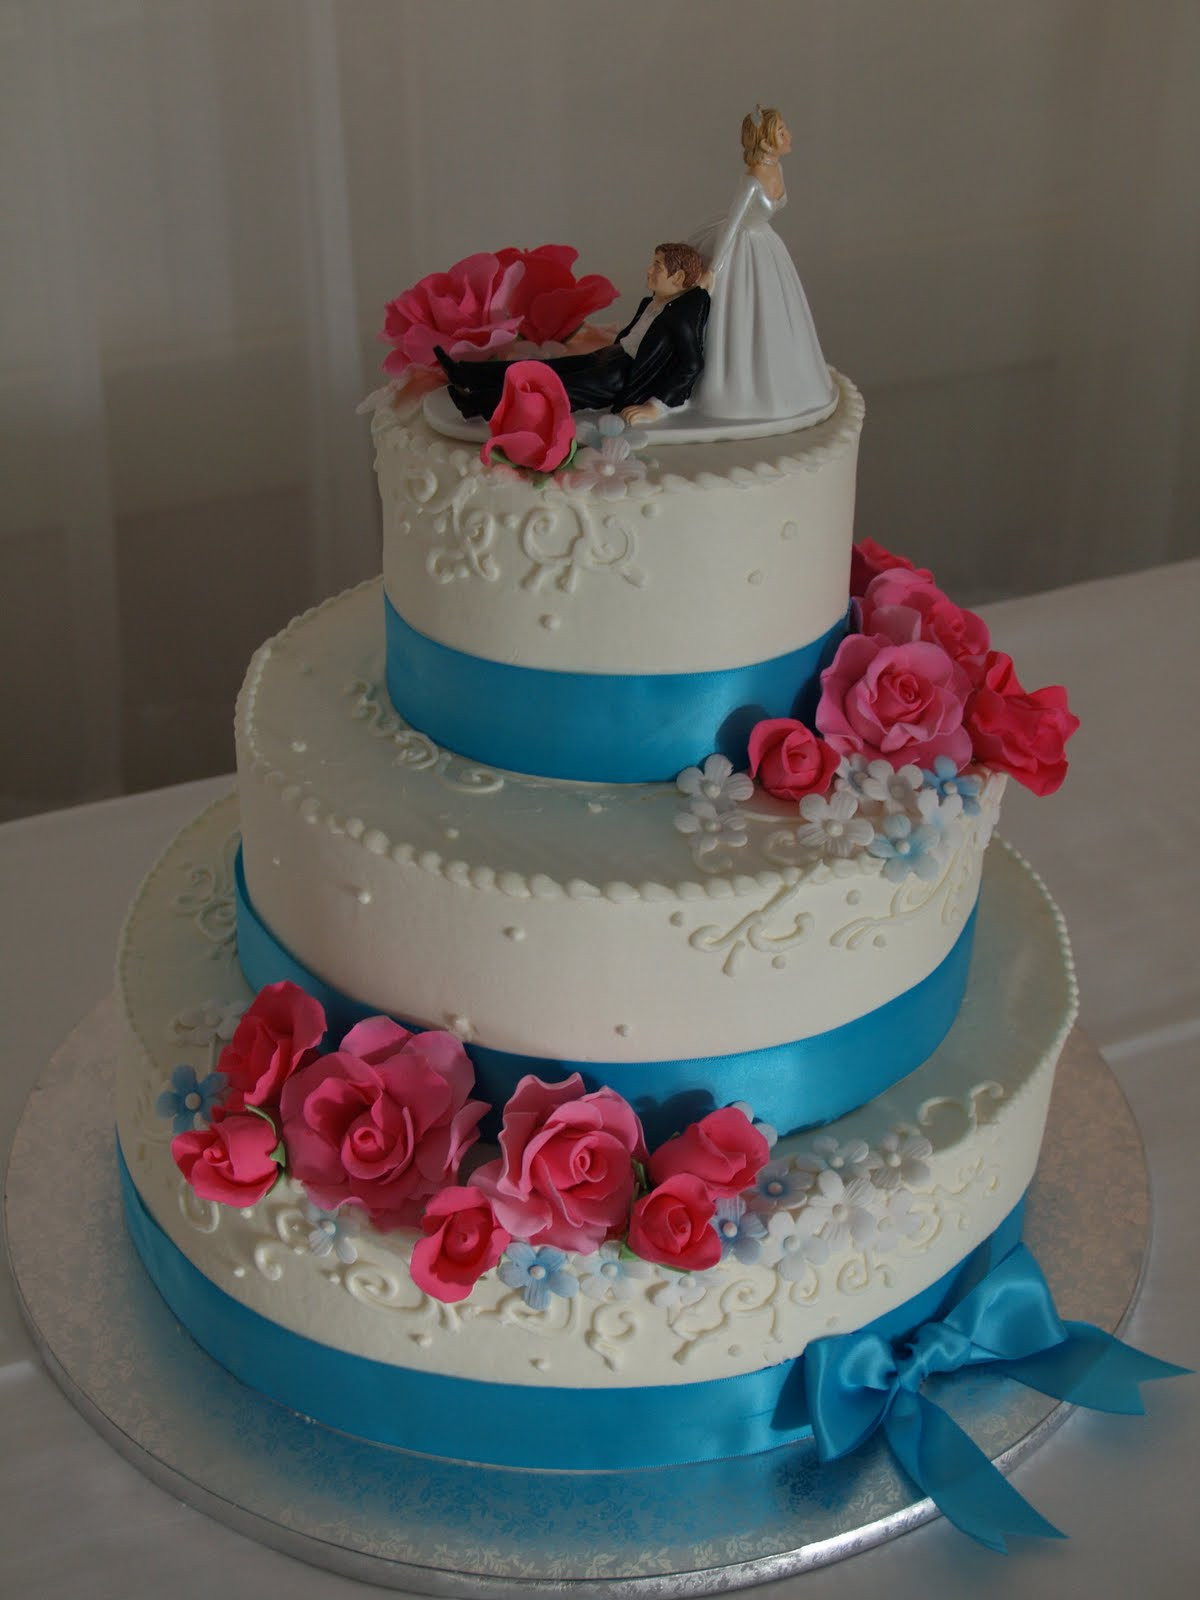 Hot Pink Wedding Cakes
 Becky s Sweets Hot Pink Turquoise wedding cake